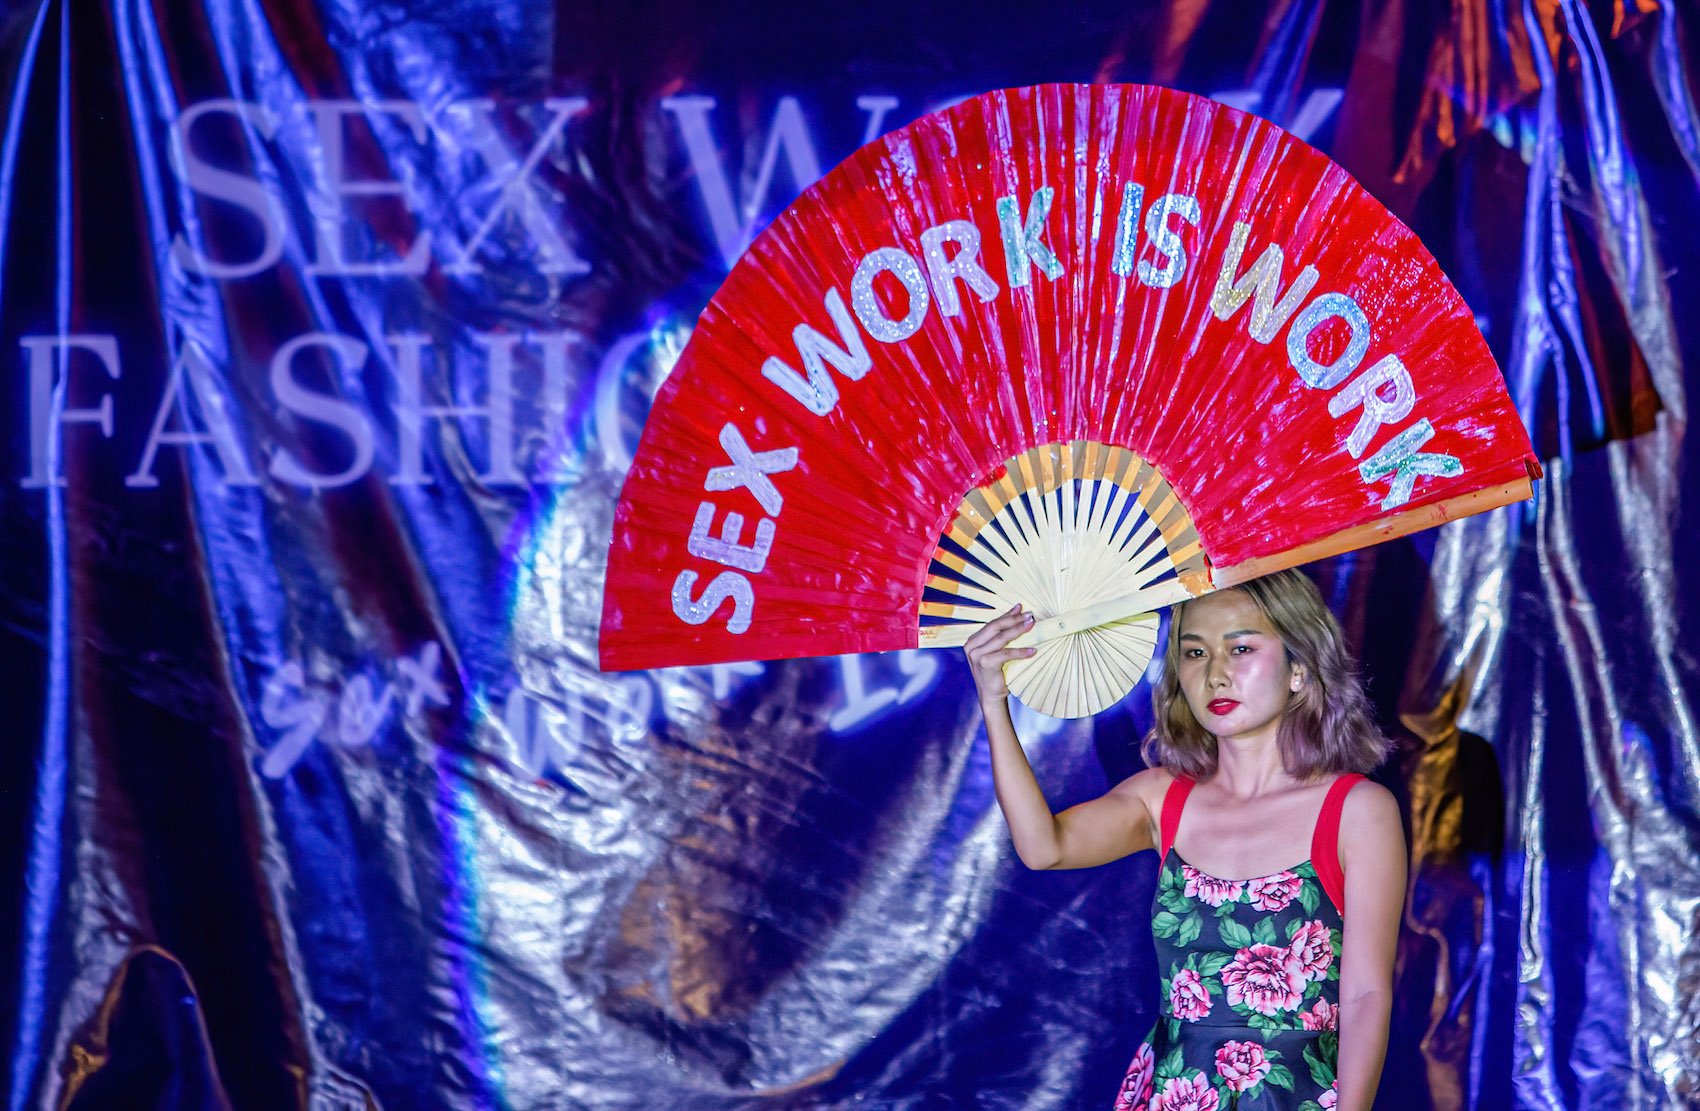 An activist holds a fan shape placard that says "Sex Work Is Work" during a Sex Work Fashion Week on International Labor Day at the Tha Phae Gate